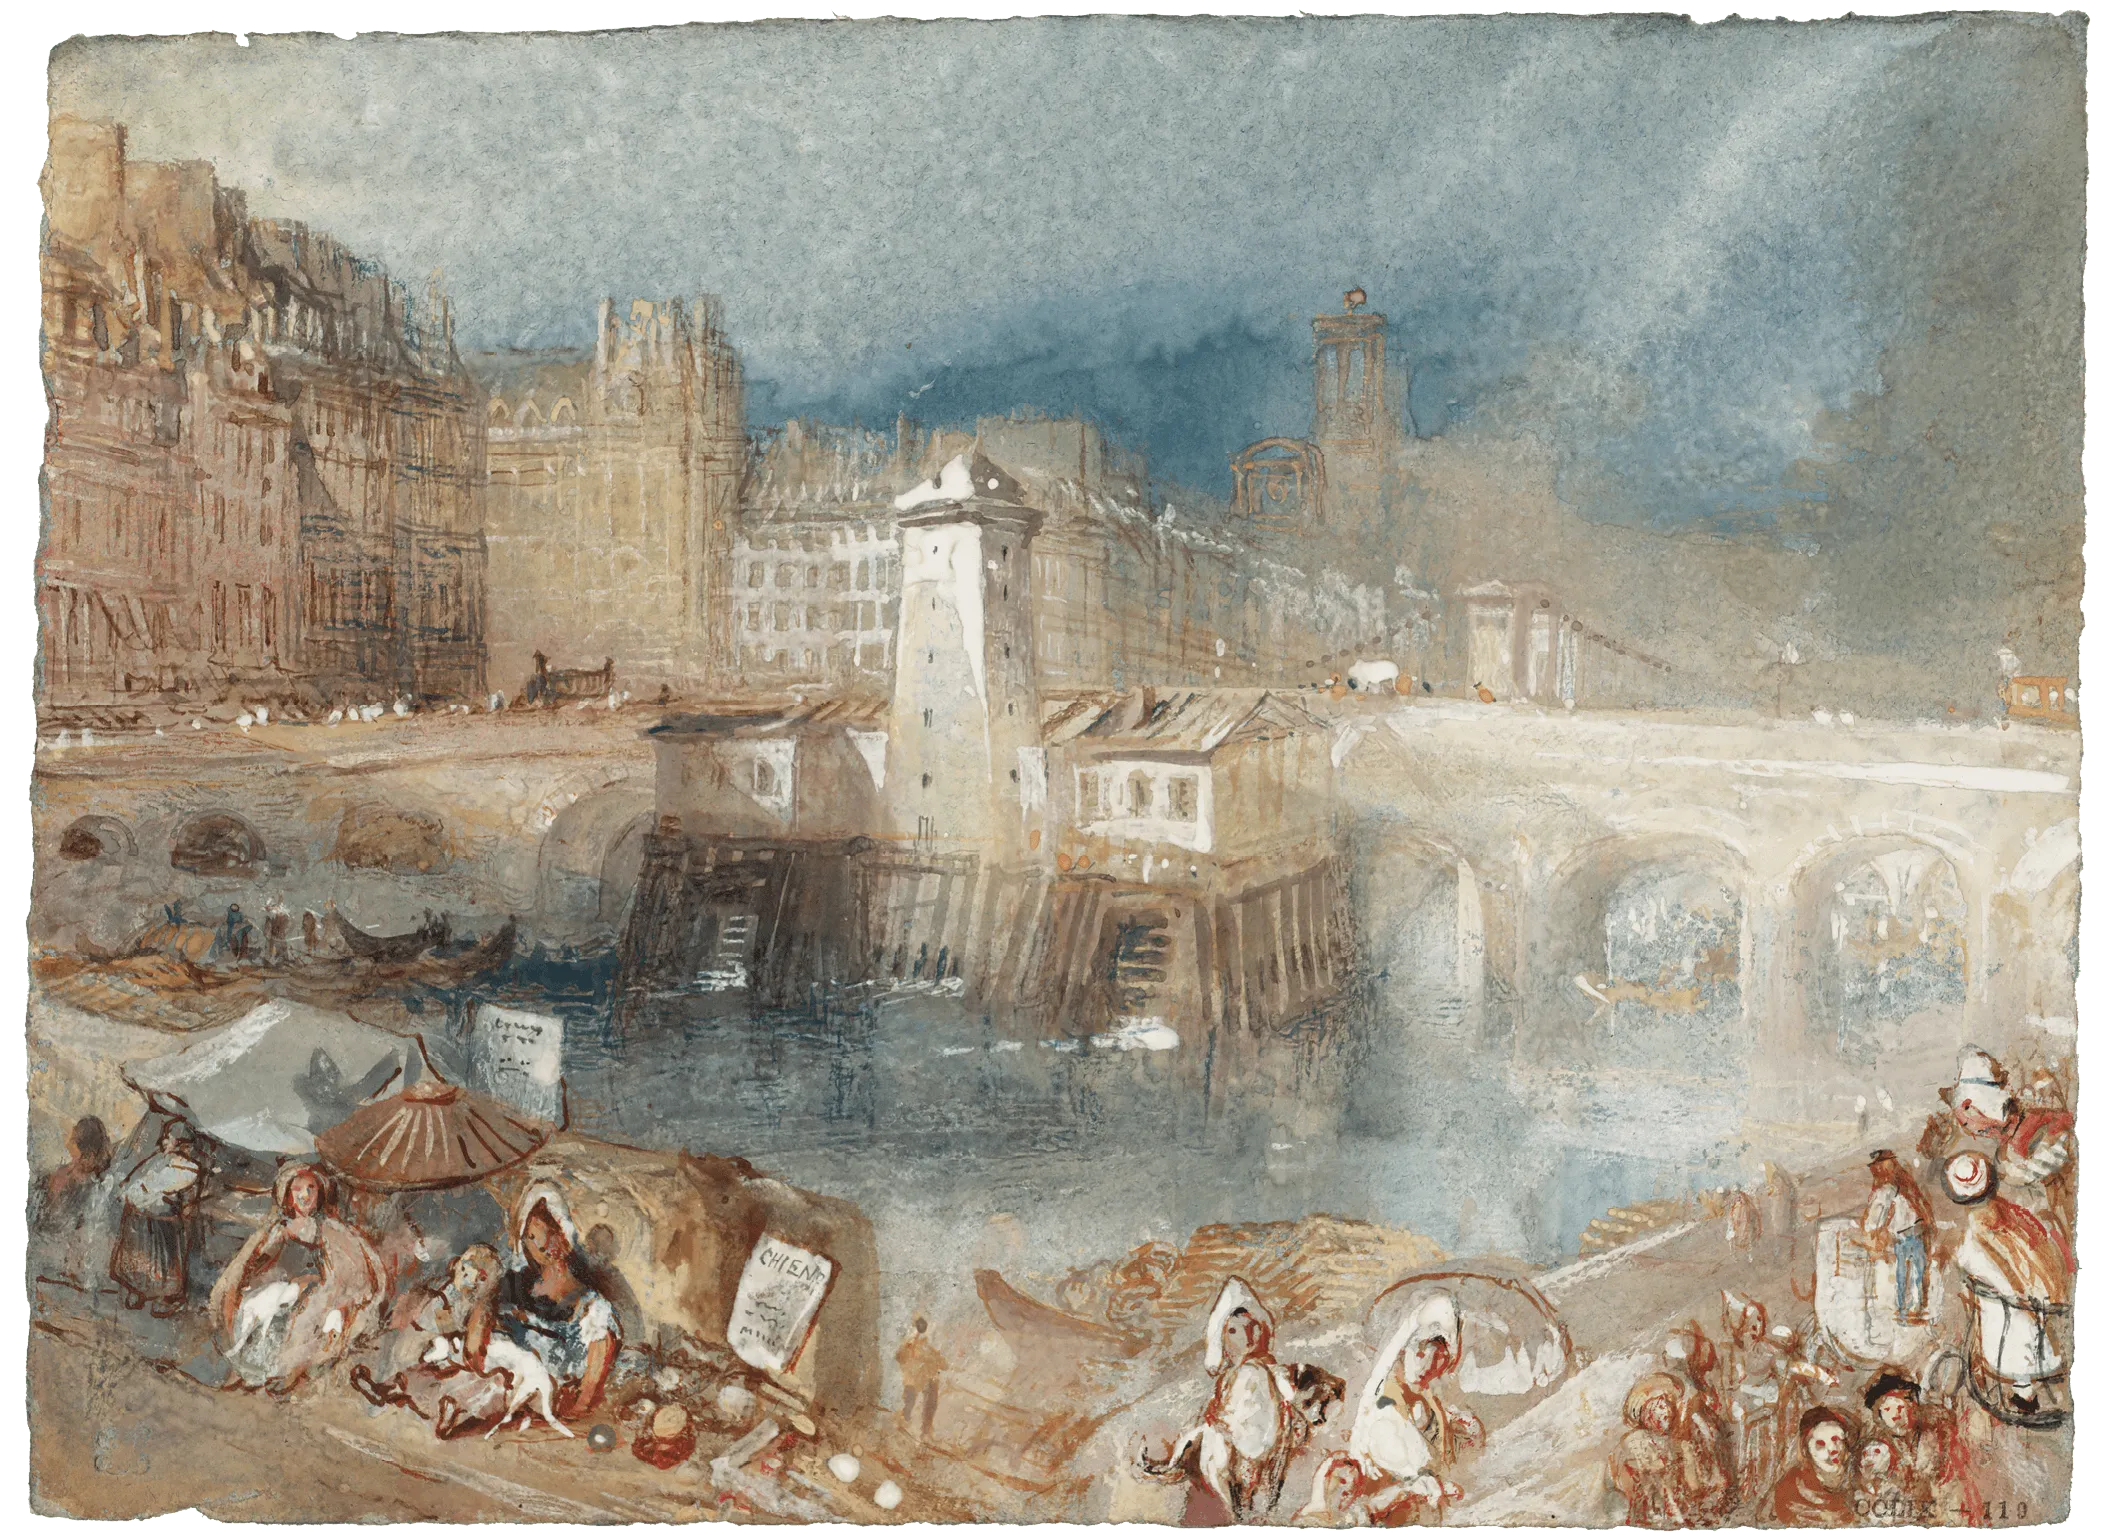 Joseph Mallord William Turner, Wanderings by the Seine, from Rouen to the Source